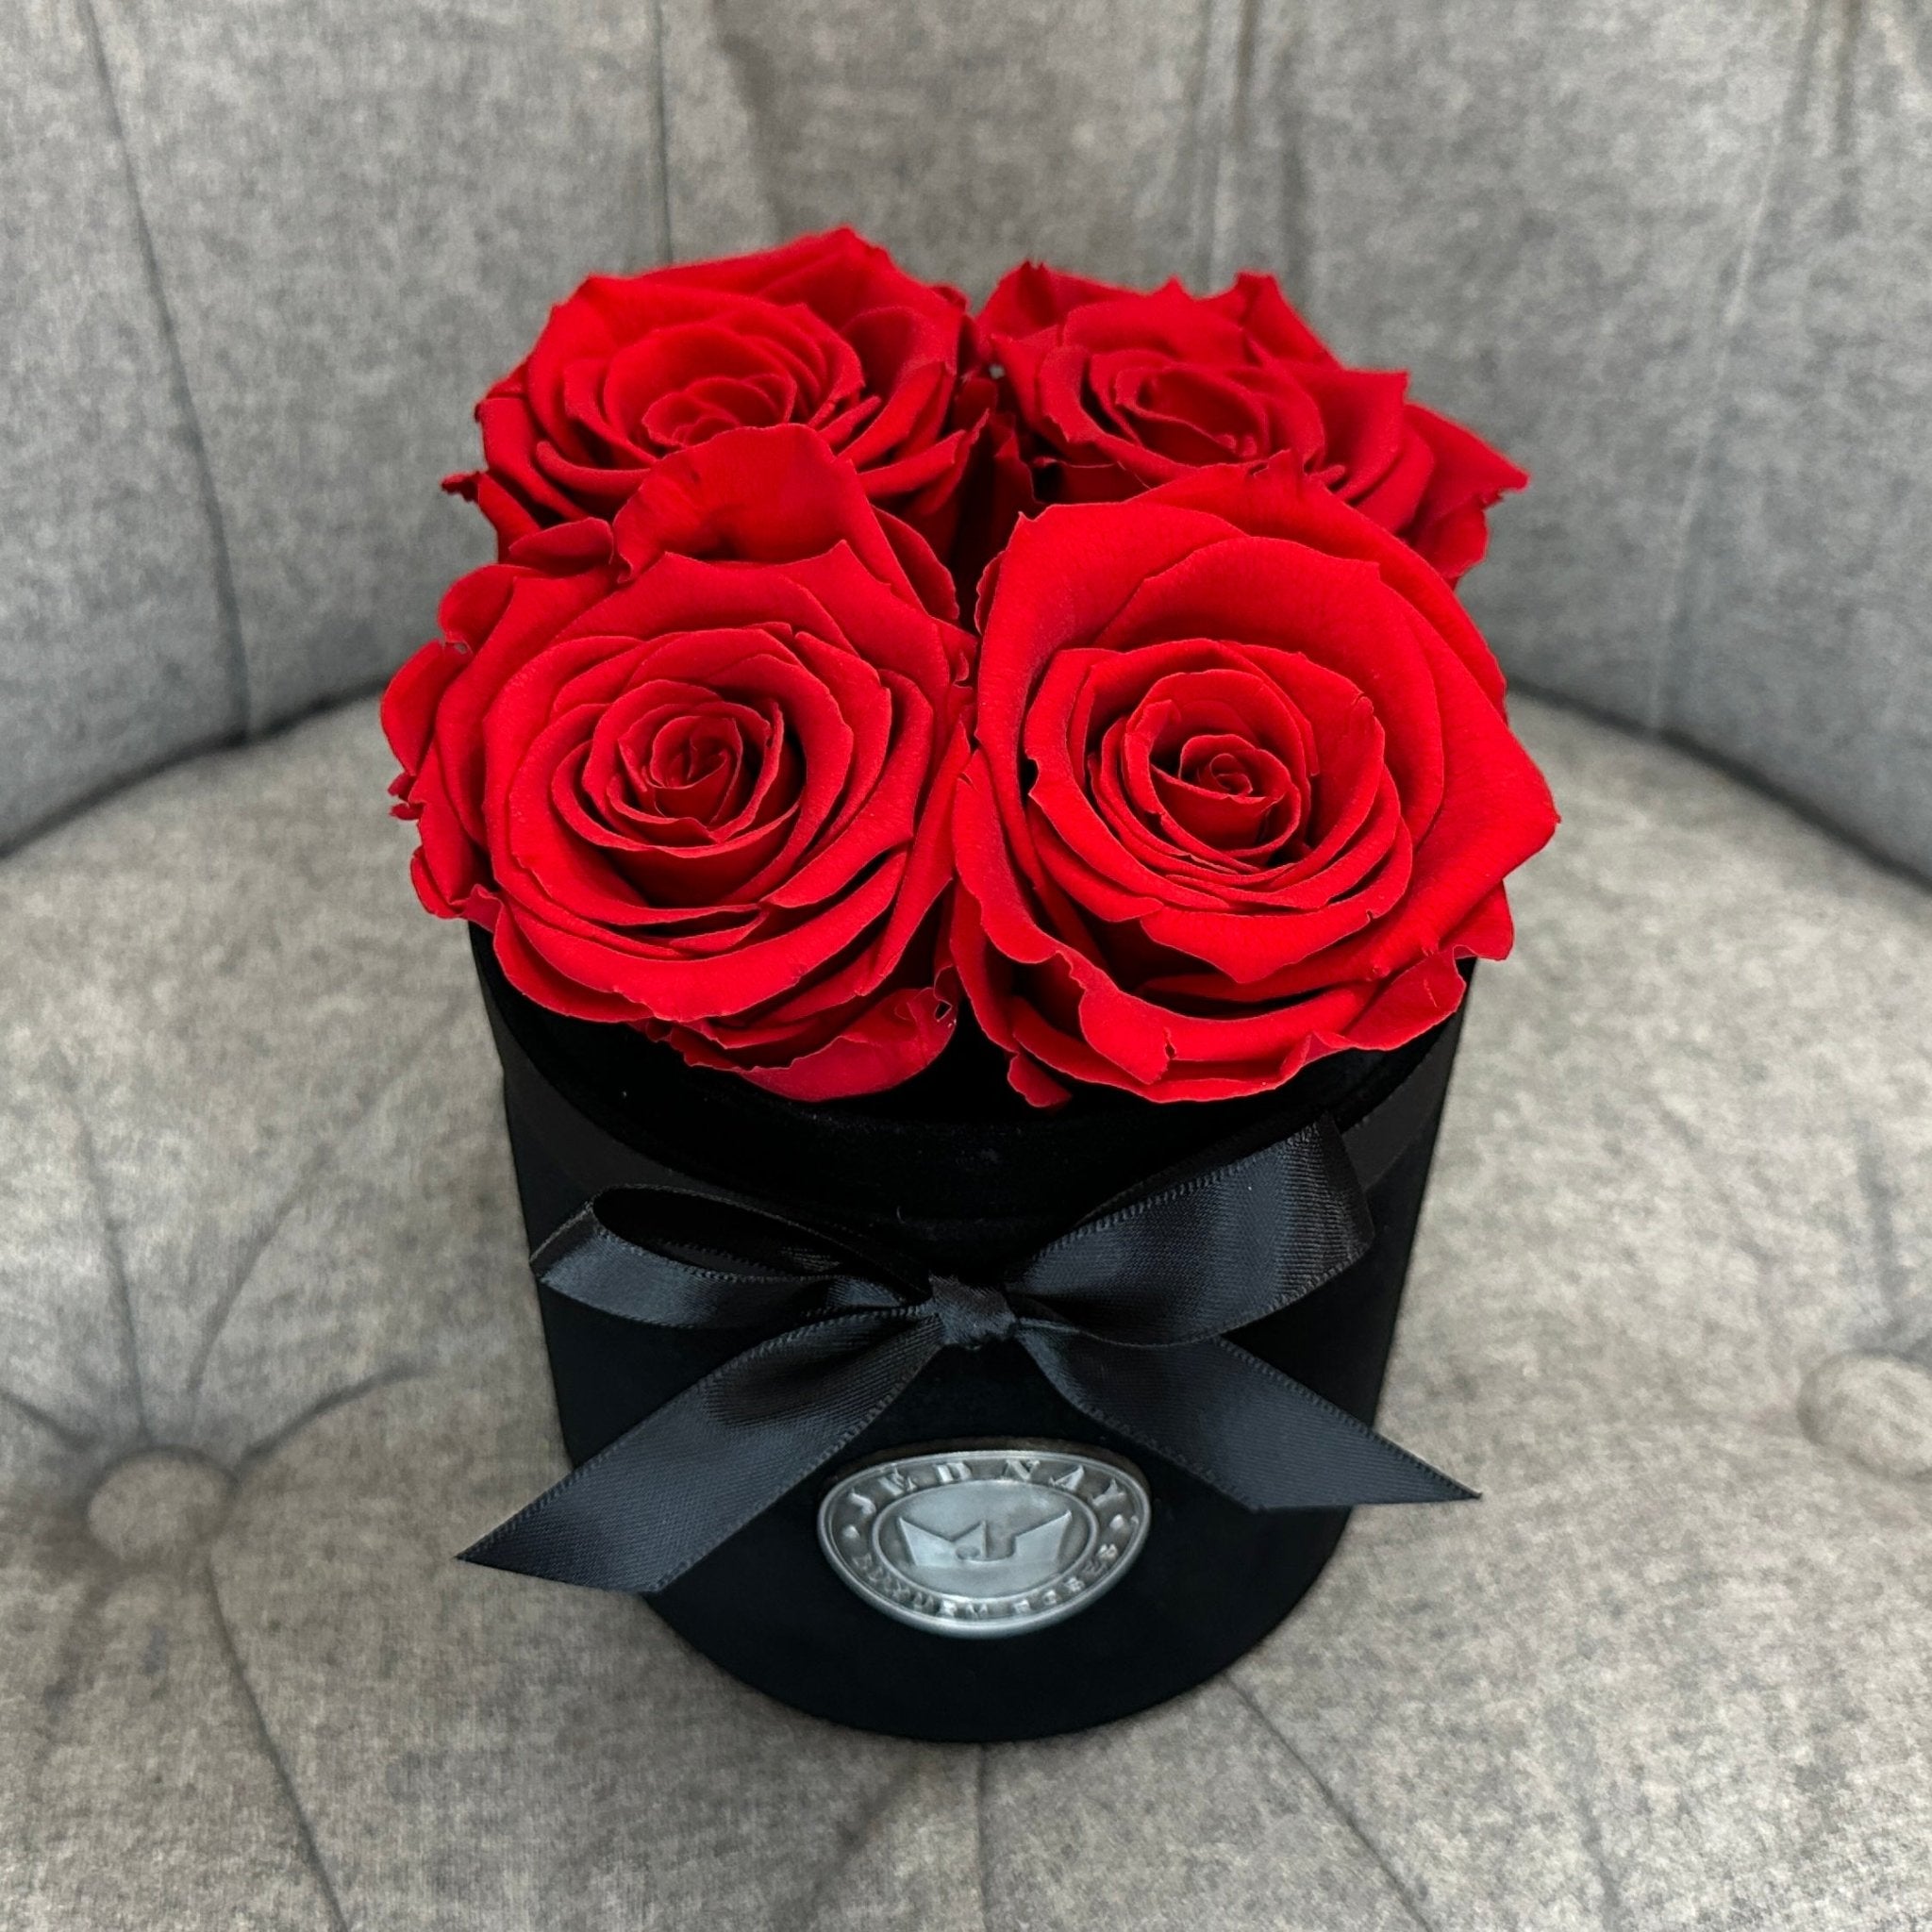 Petite Black Suede Forever Rose Box - Classic Red Eternal Roses - Jednay Roses